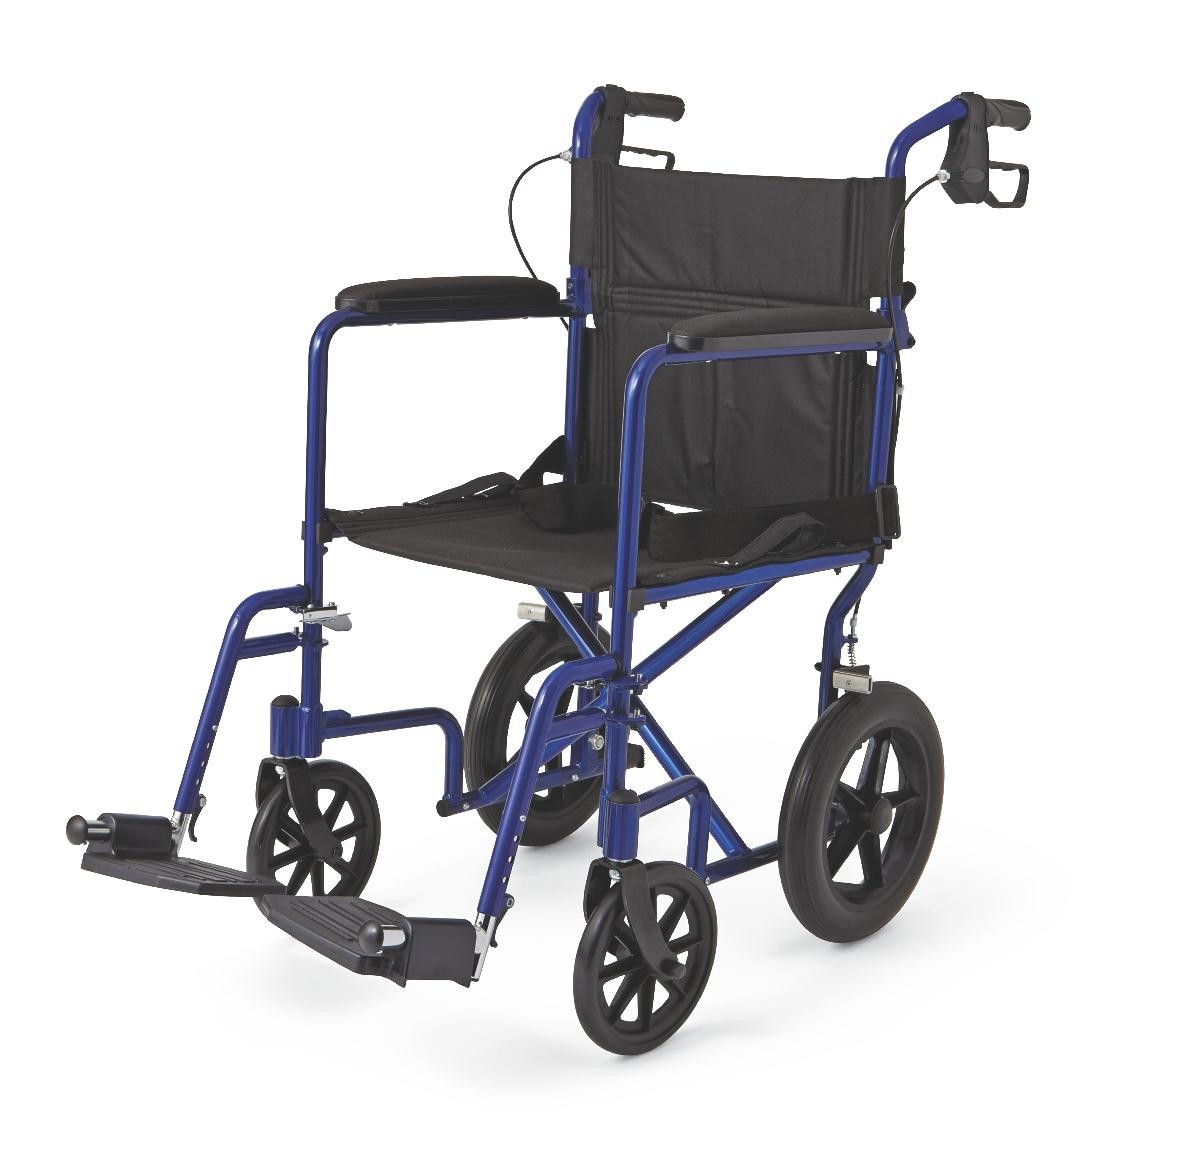 Transport Wheelchairs Portable Wheelchairs Wheelchairs For Sale Transport Chairs